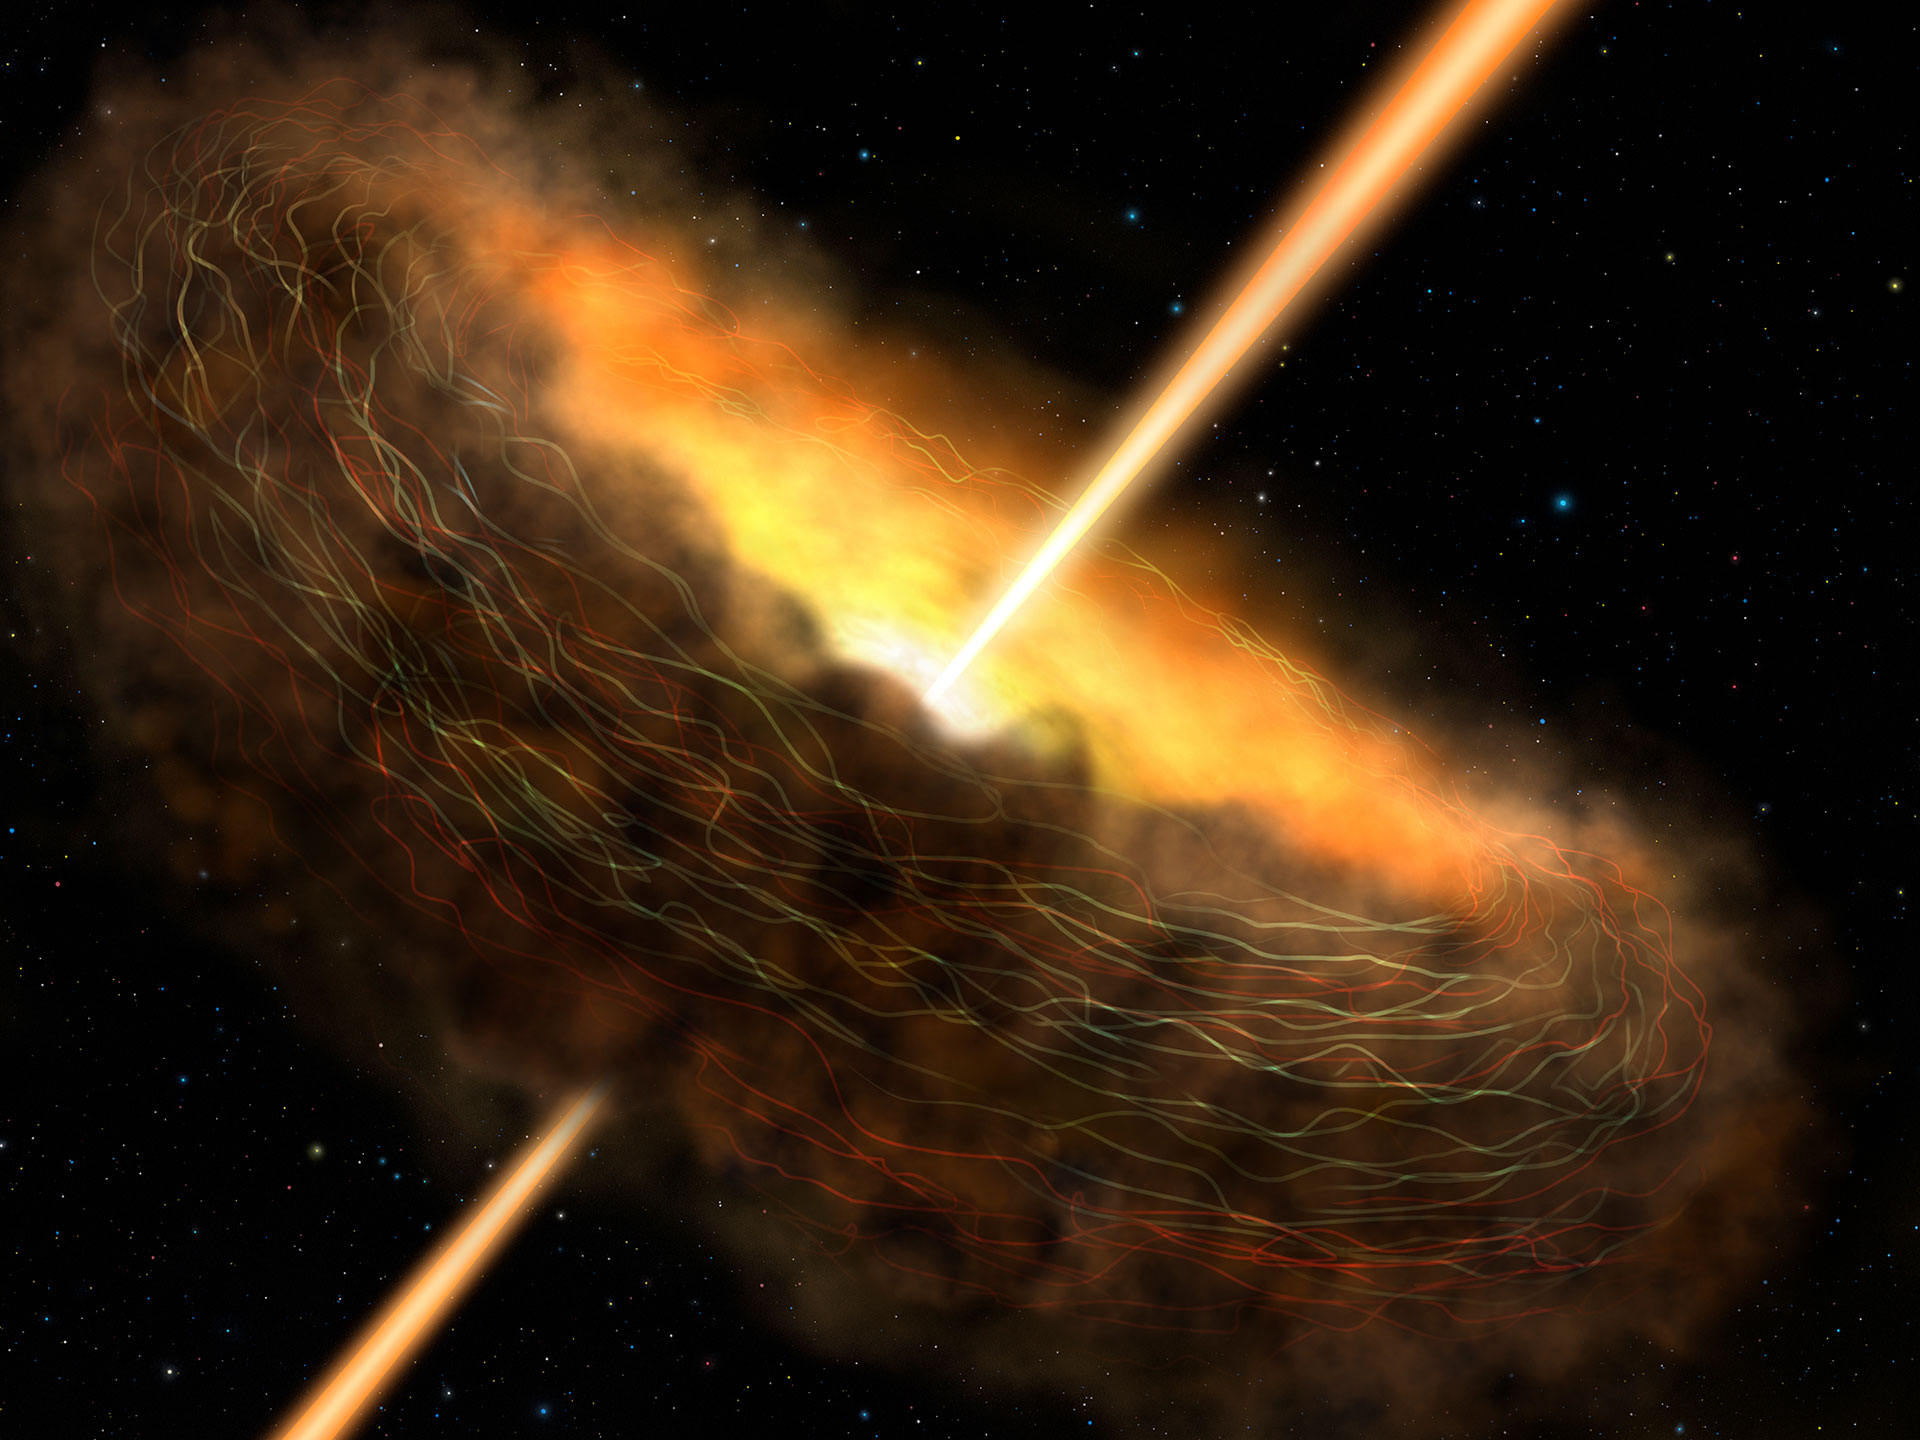 Magnetic Fields Key to Black Hole Activity